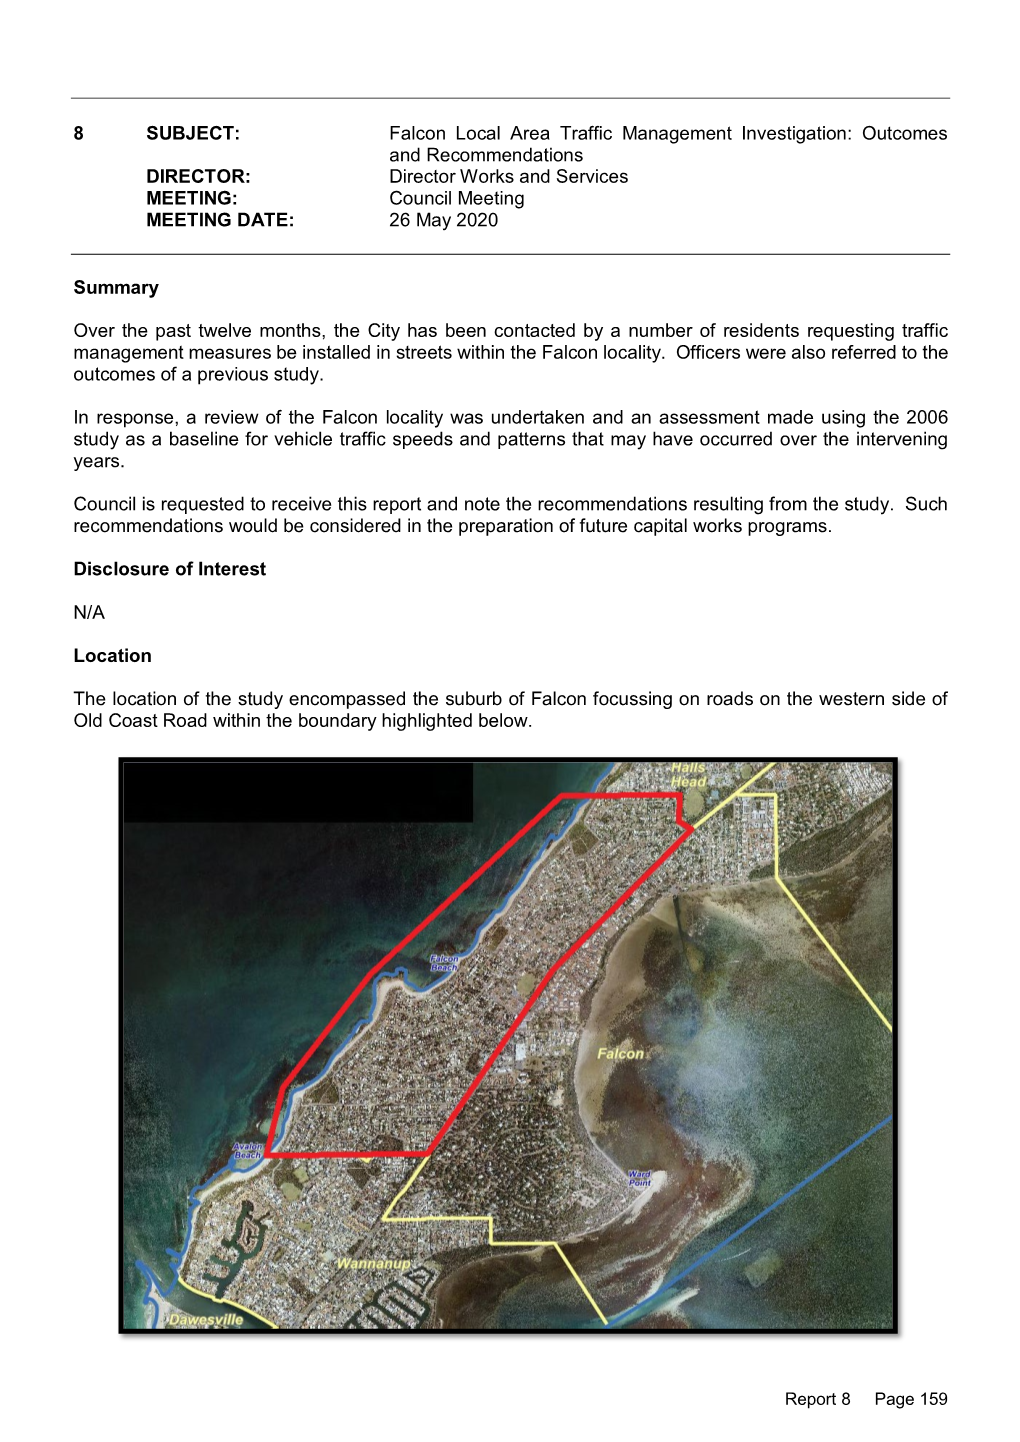 Falcon Local Area Traffic Management Investigation: Outcomes and Recommendations DIRECTOR